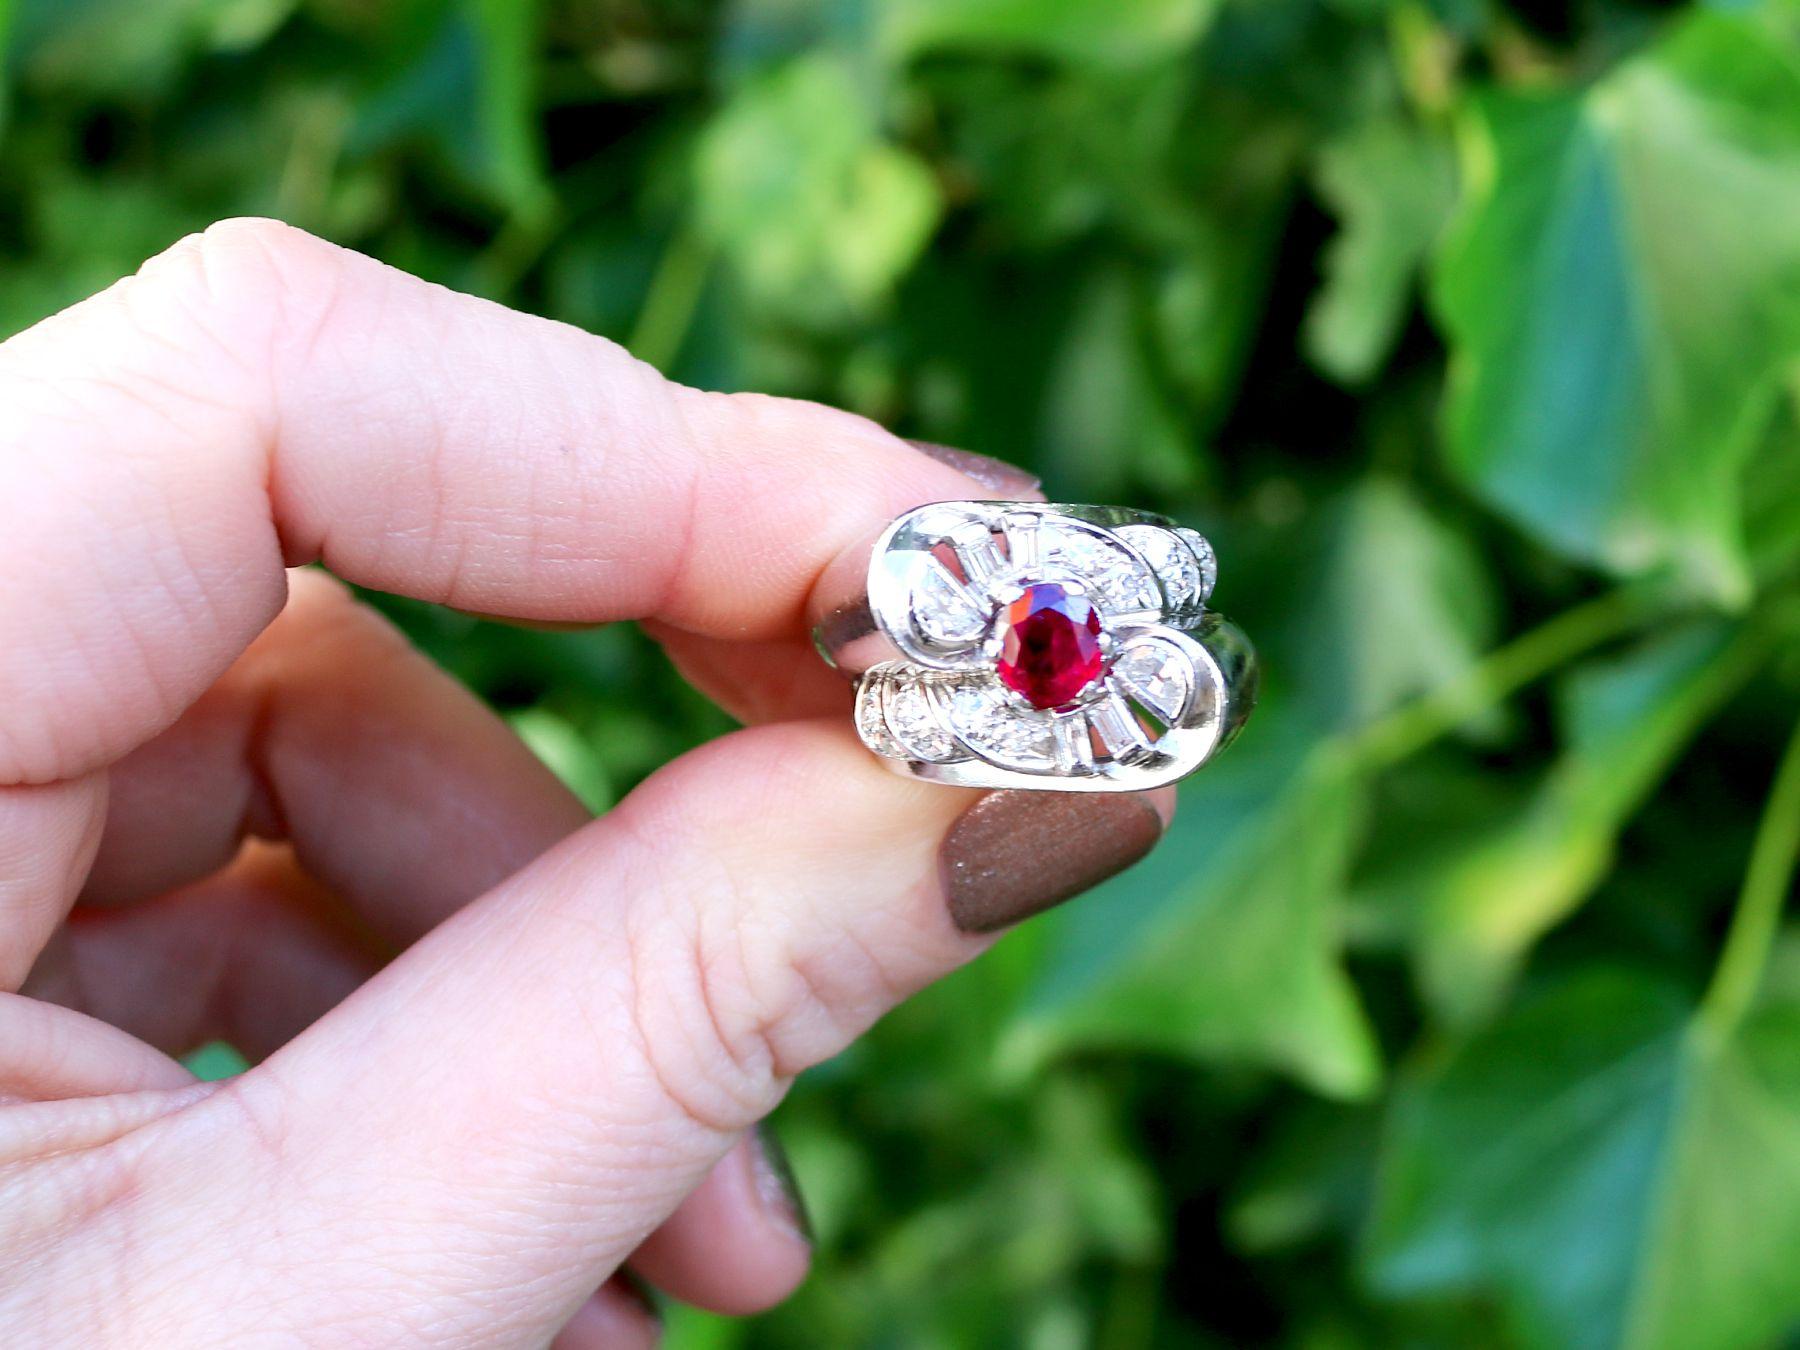 A fine and impressive vintage French 0.90 carat ruby and 0.48 carat diamond, platinum cocktail ring in the Art Deco style; part of our diverse vintage jewelry and collections.

This fine and impressive vintage oval cut ruby and diamond ring has been